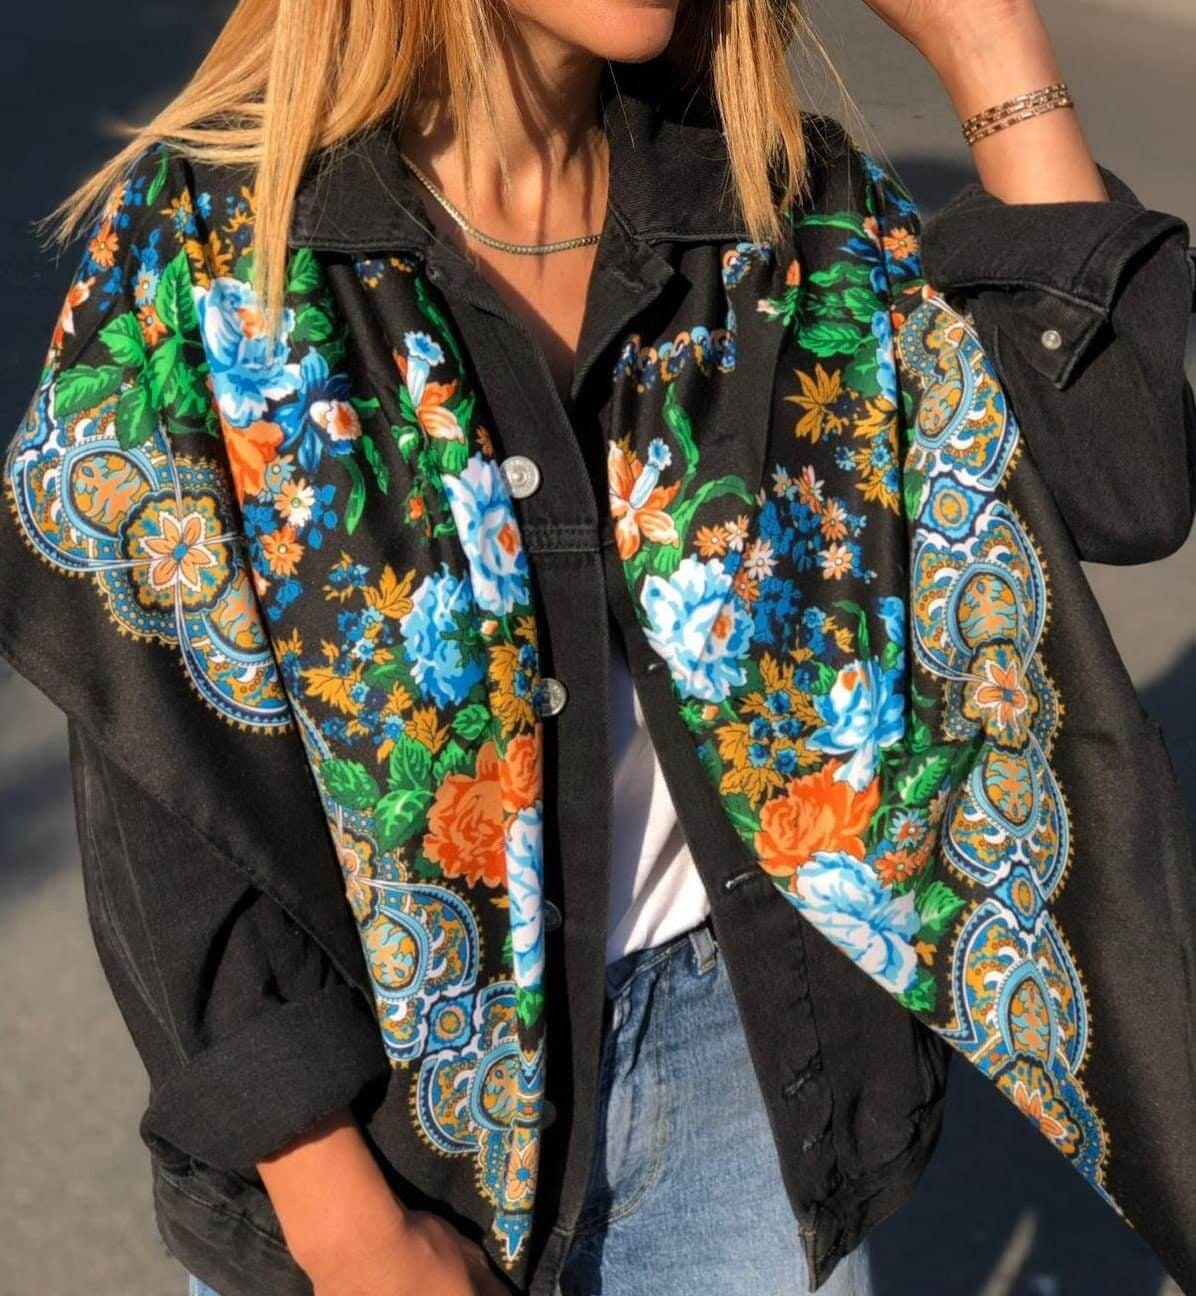 Add a pop of color to your outfit with this black and multicolor floral cotton scarf - the perfect accessory for spring and autumn.